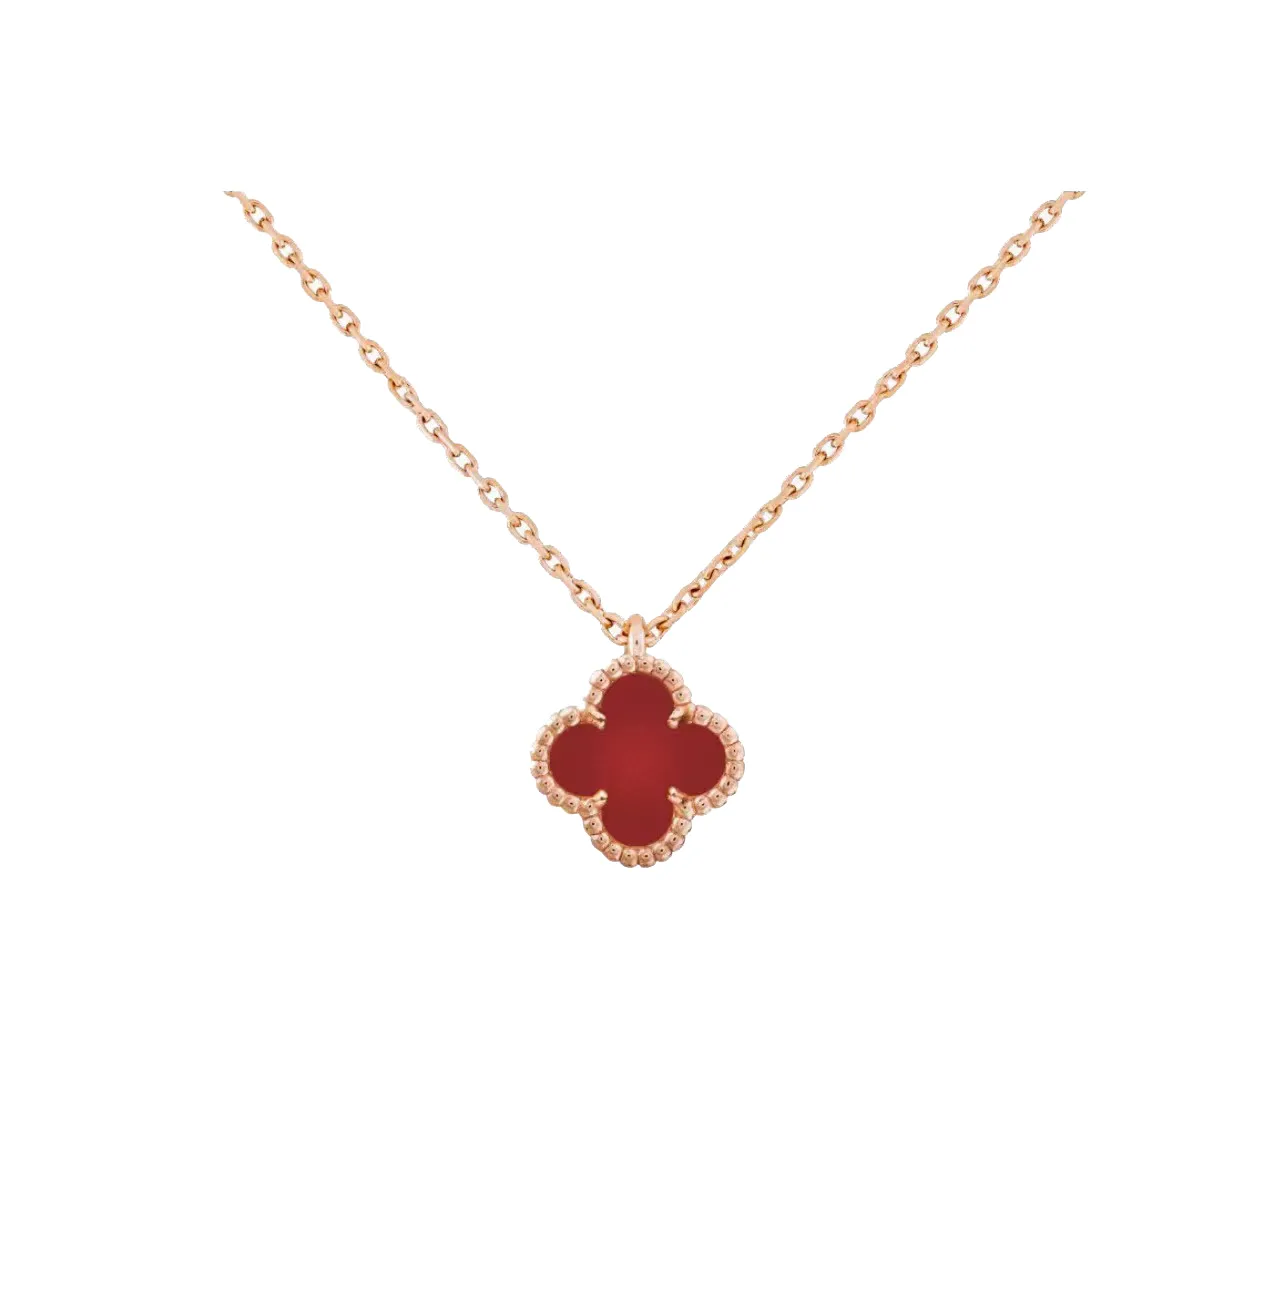 Fashion Van-Clef & Arpes Necklace luxury 4/Four Leaf Clover Four Grass Necklace Women's Light Luxury Gold Thick Plating 18K Rose High Grade Sense Jewelry High quality